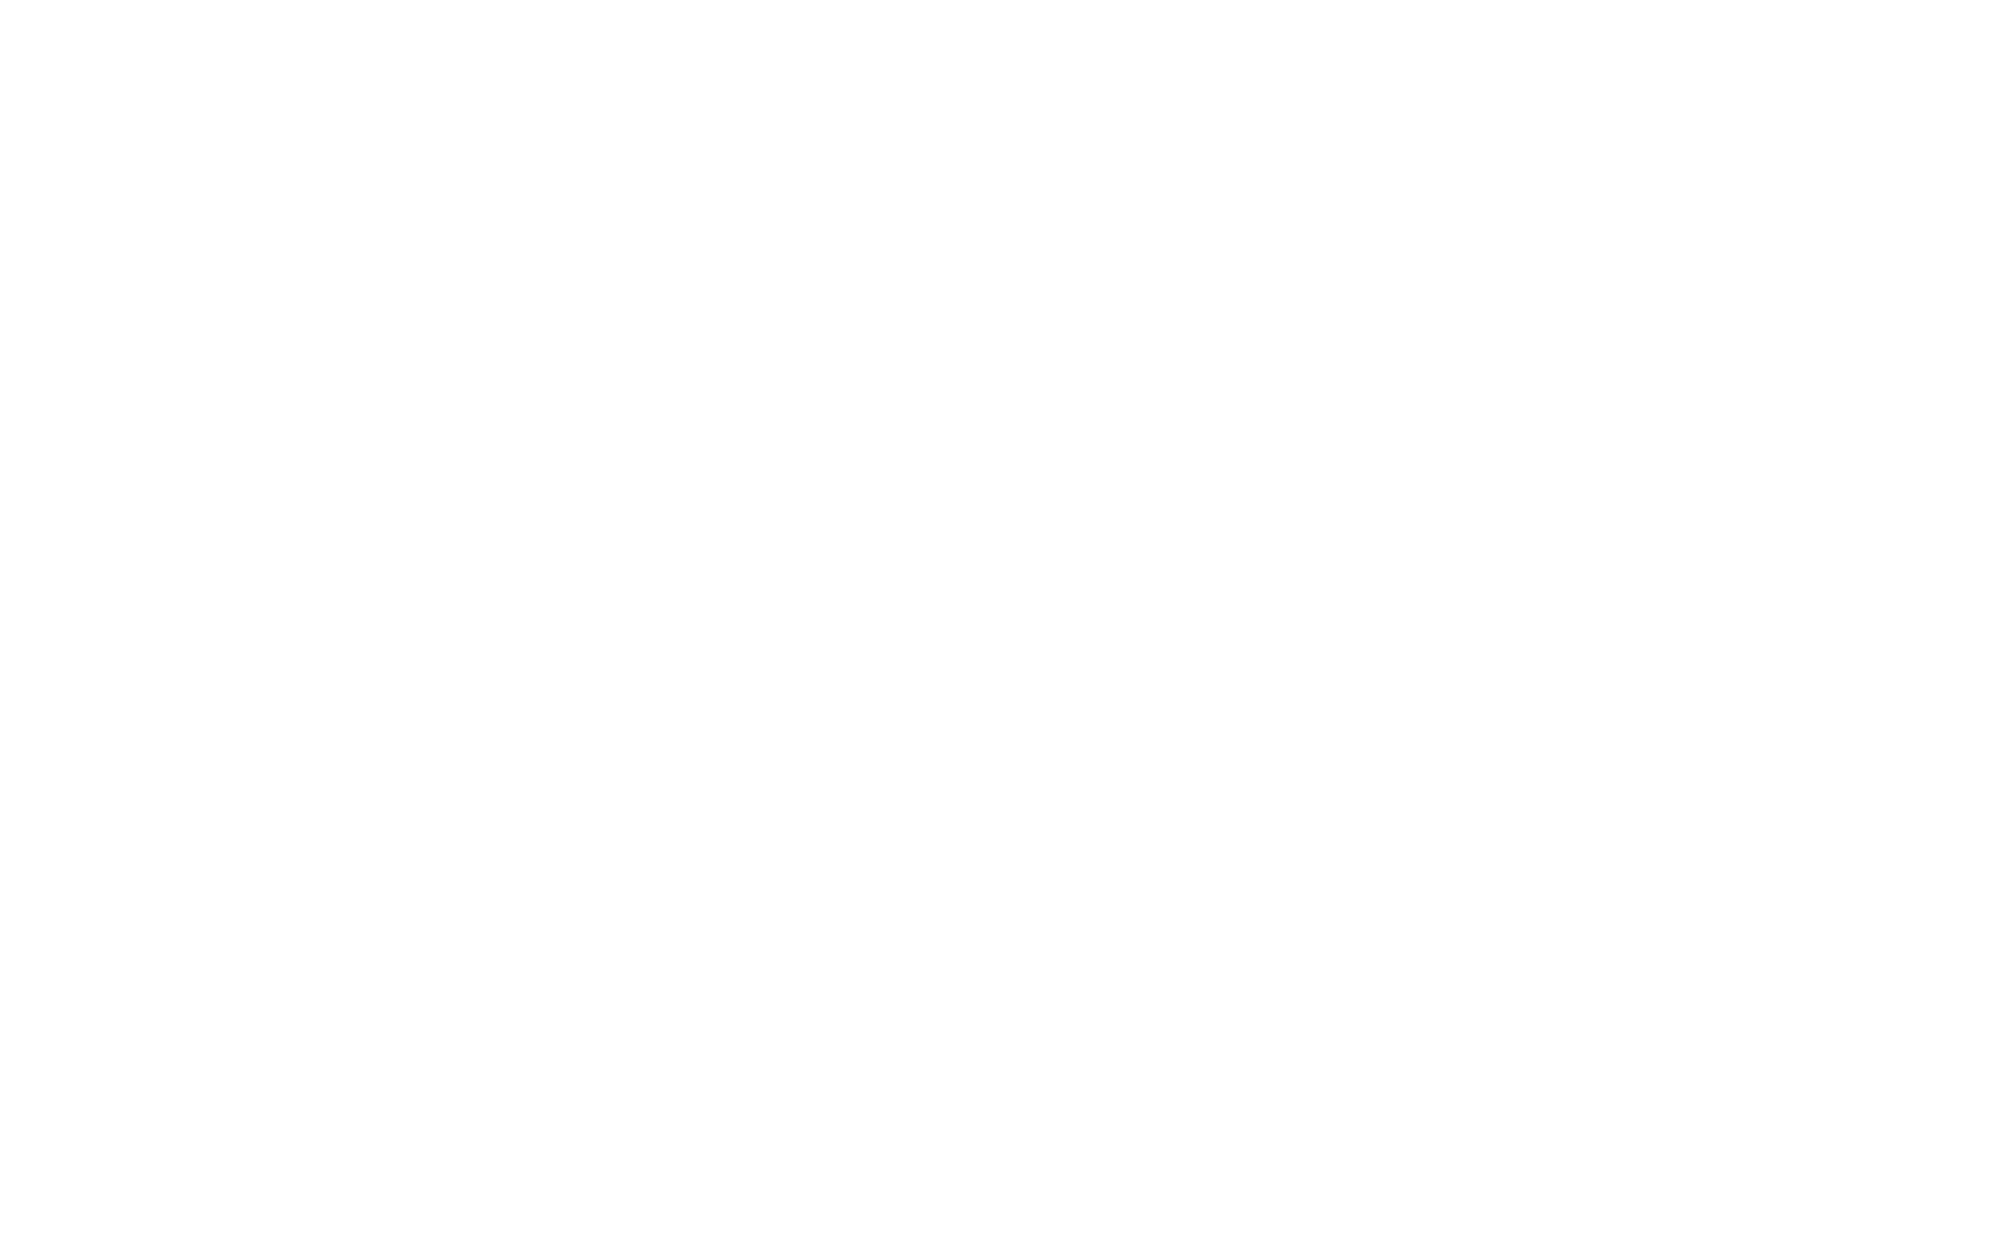 We buy Houses Fast For Cash Colorado Homes